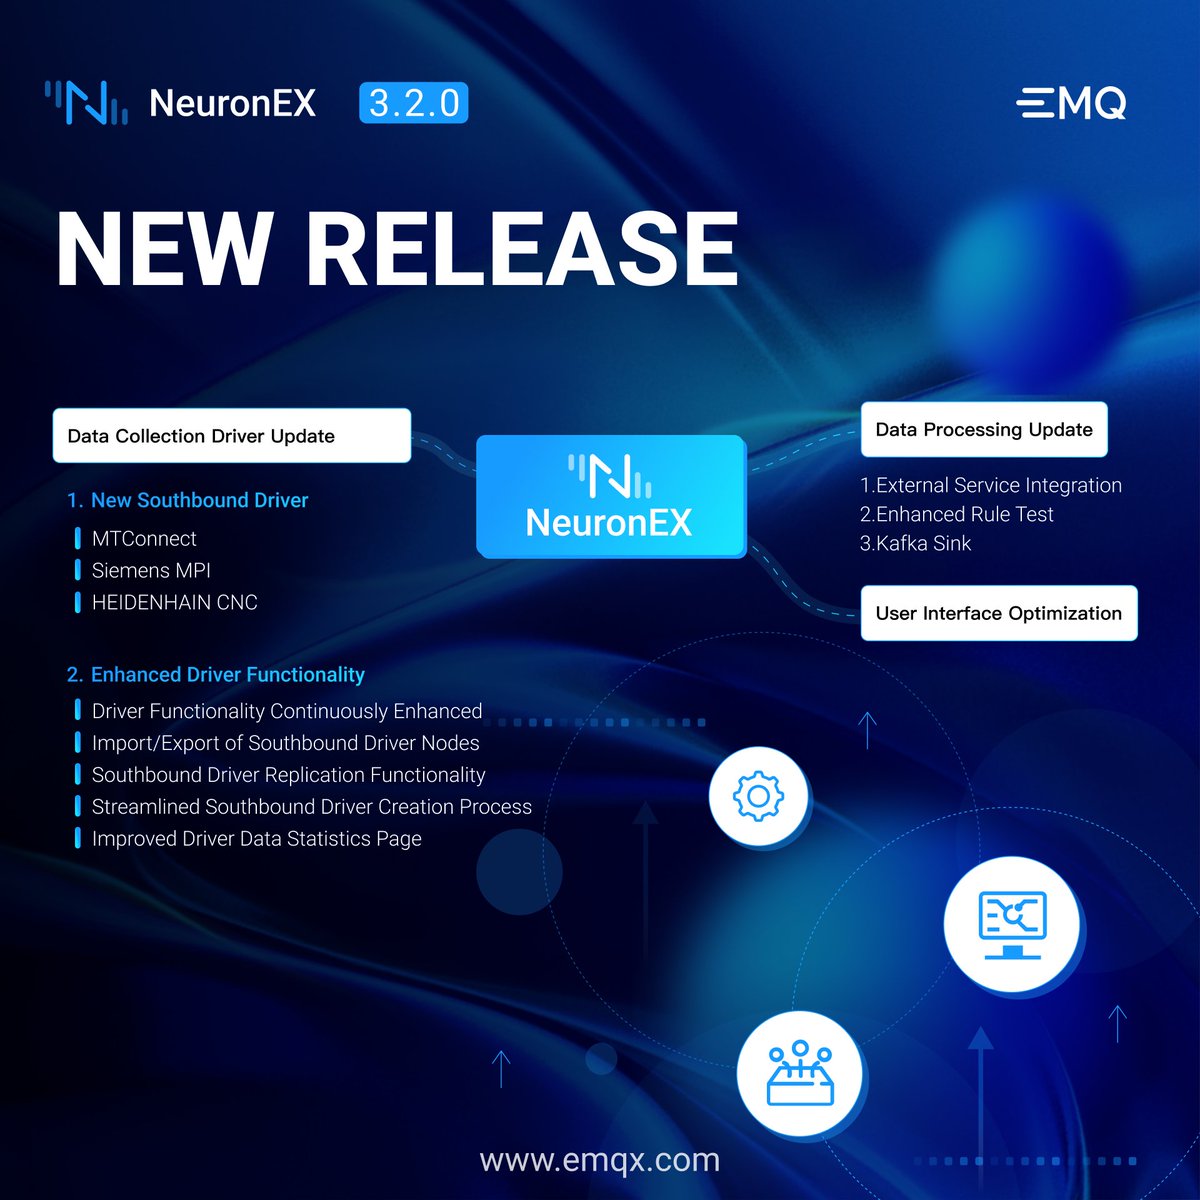 🎉 We're thrilled to announce the launch of #NeuronEX 3.2.0! This update brings new features to enhance data collection, analysis, and management in industrial settings. 📊 Plus, we've optimized the UI for a smoother experience. 💻 Check it out! ⬇️ social.emqx.com/u/T3Smsy